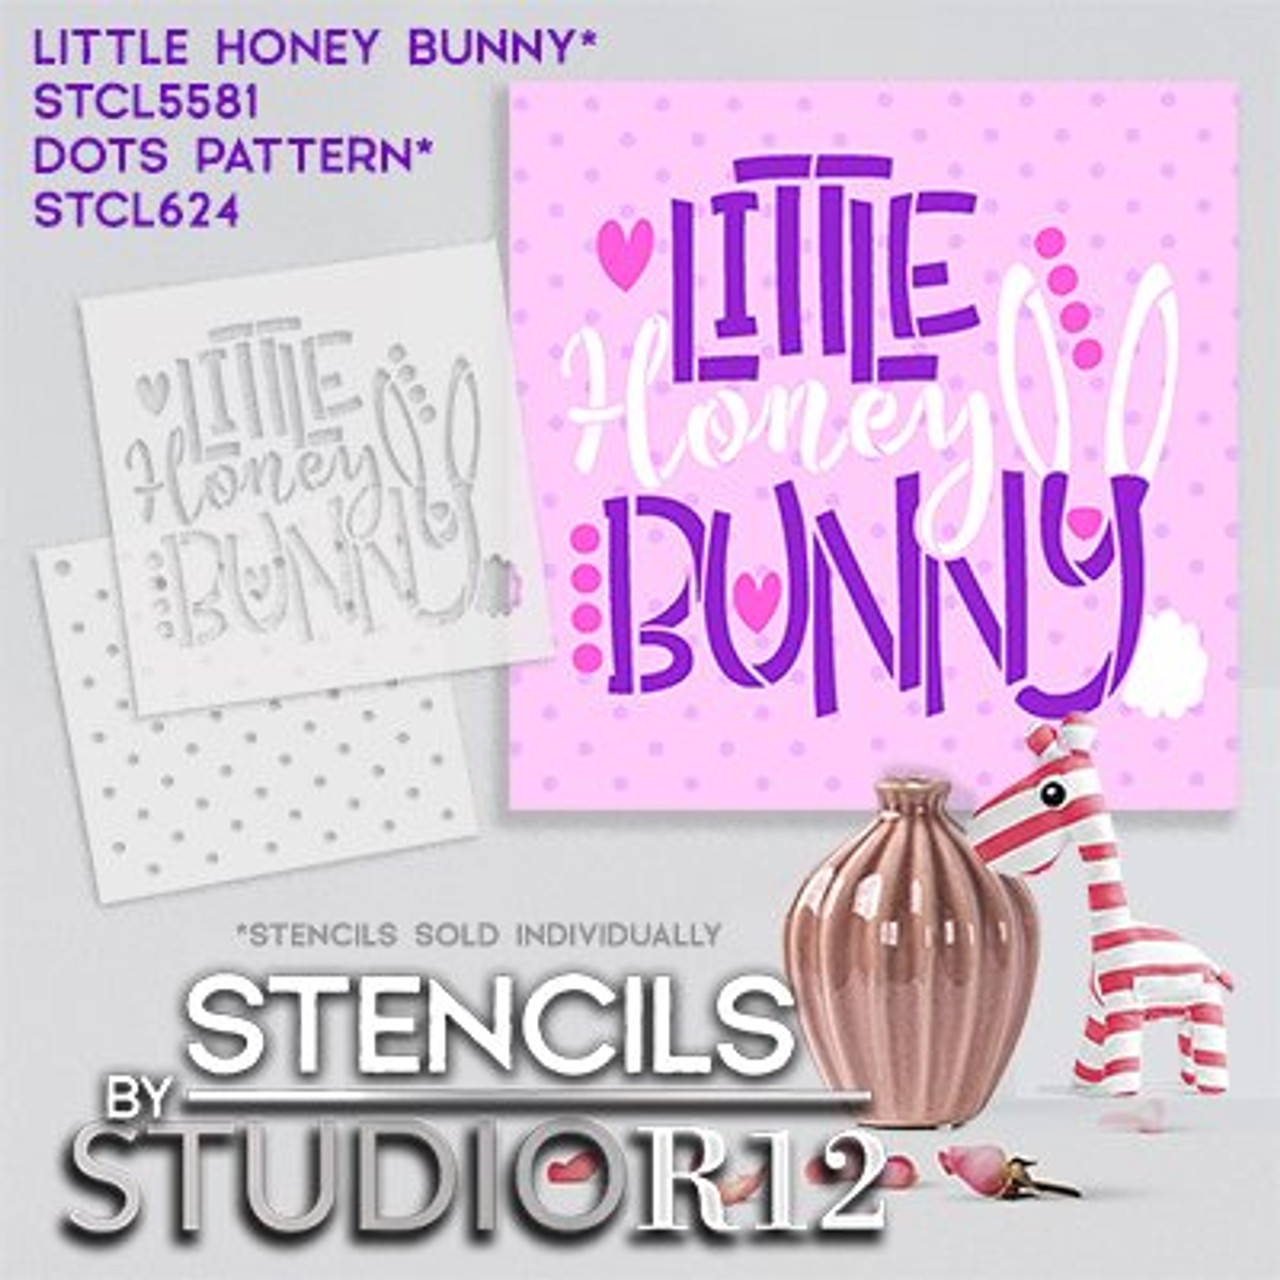 Little Honey Bunny Stencil by StudioR12 | DIY Farmhouse Spring Home Decor | Fun Easter Word Art | Craft & Paint Wood Sign | Select Size